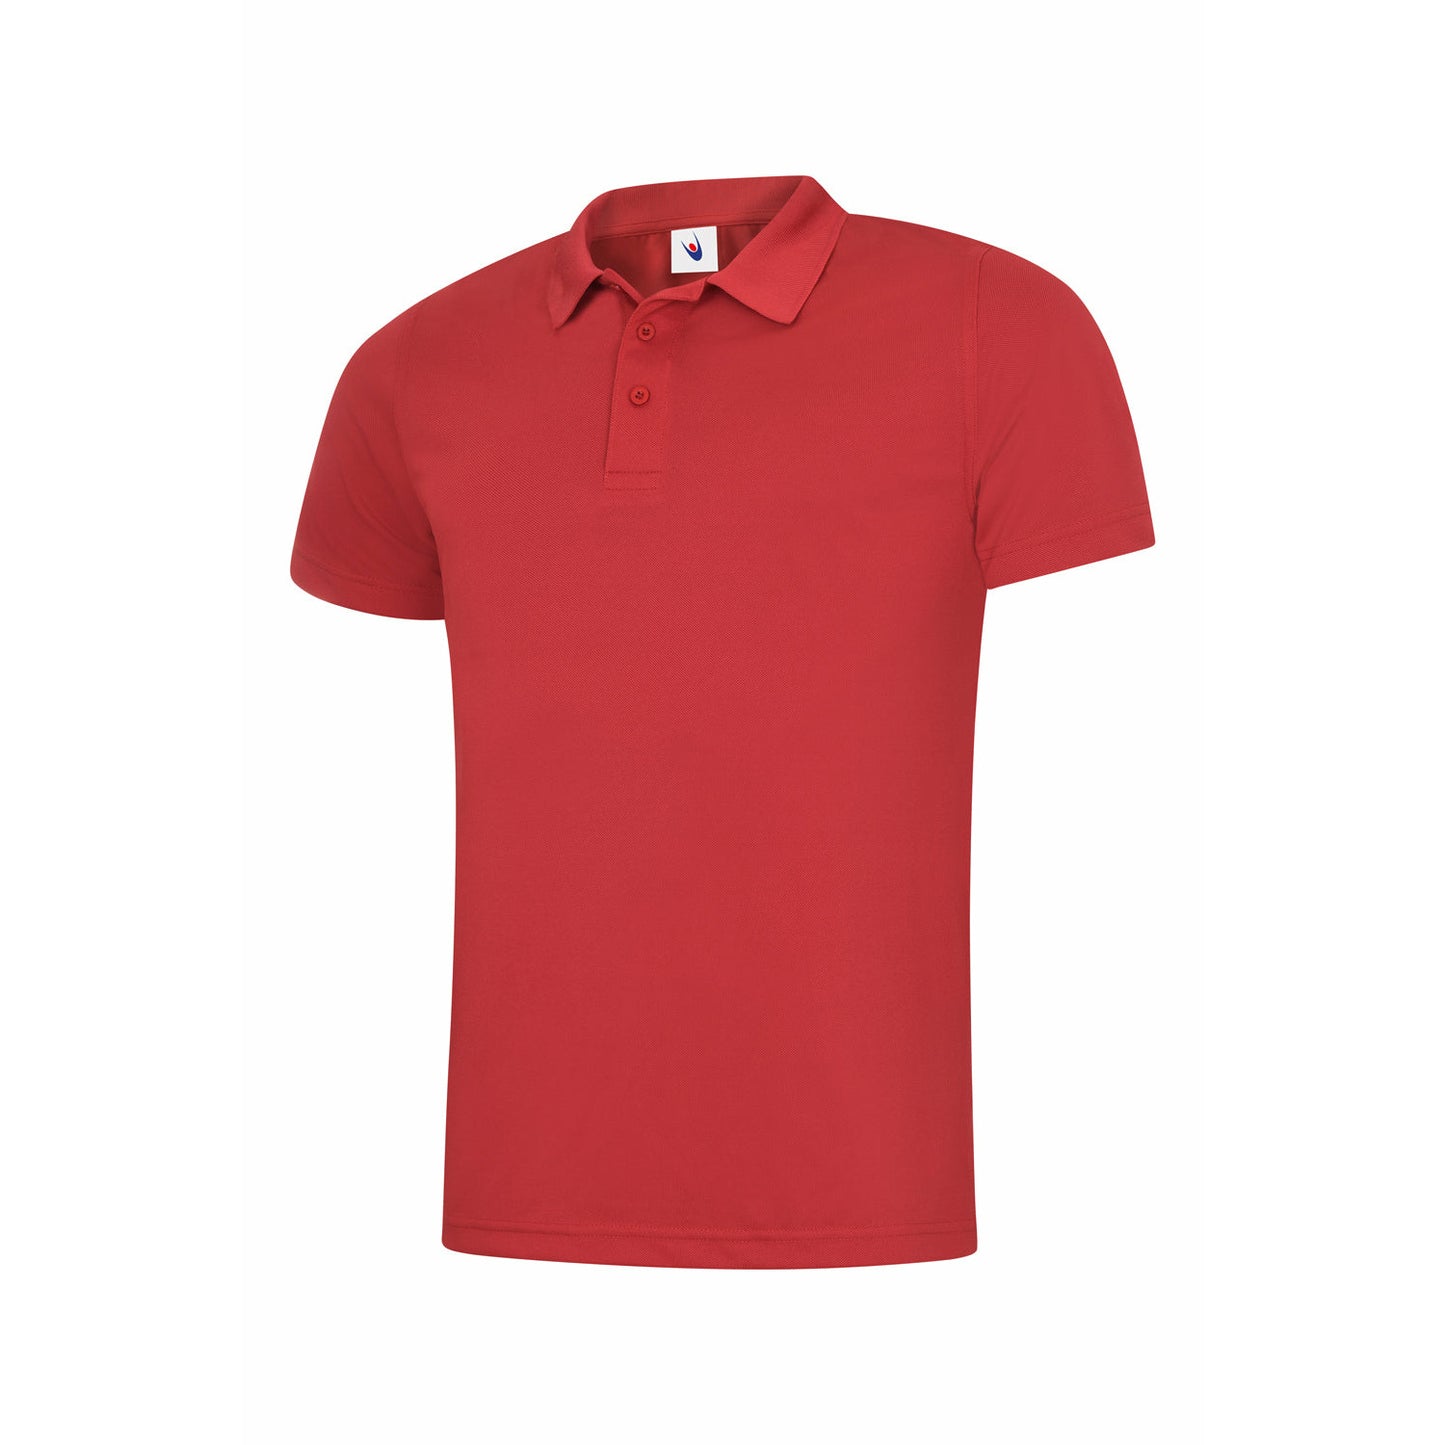 mens-super-cool-workwear-poloshirt Red